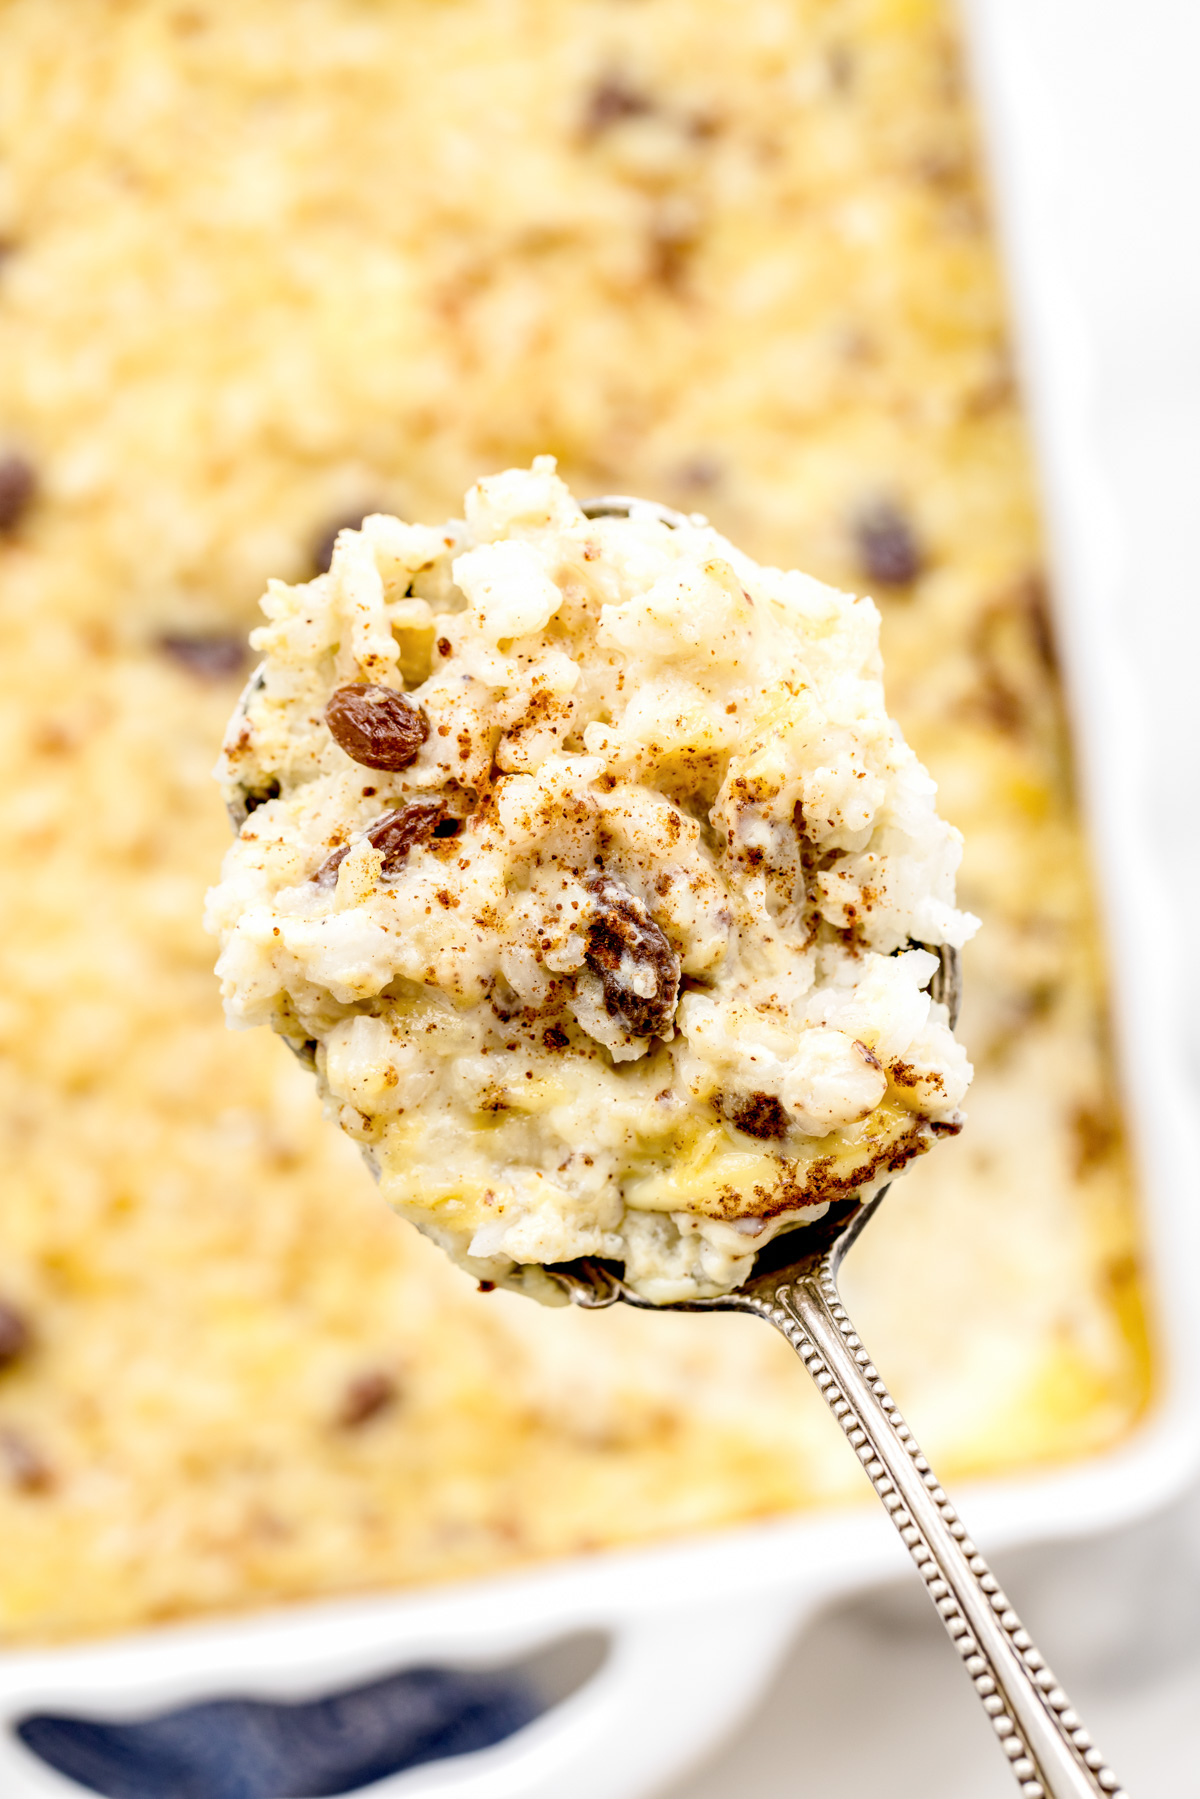 Scooping baked rice pudding from a baking dish.